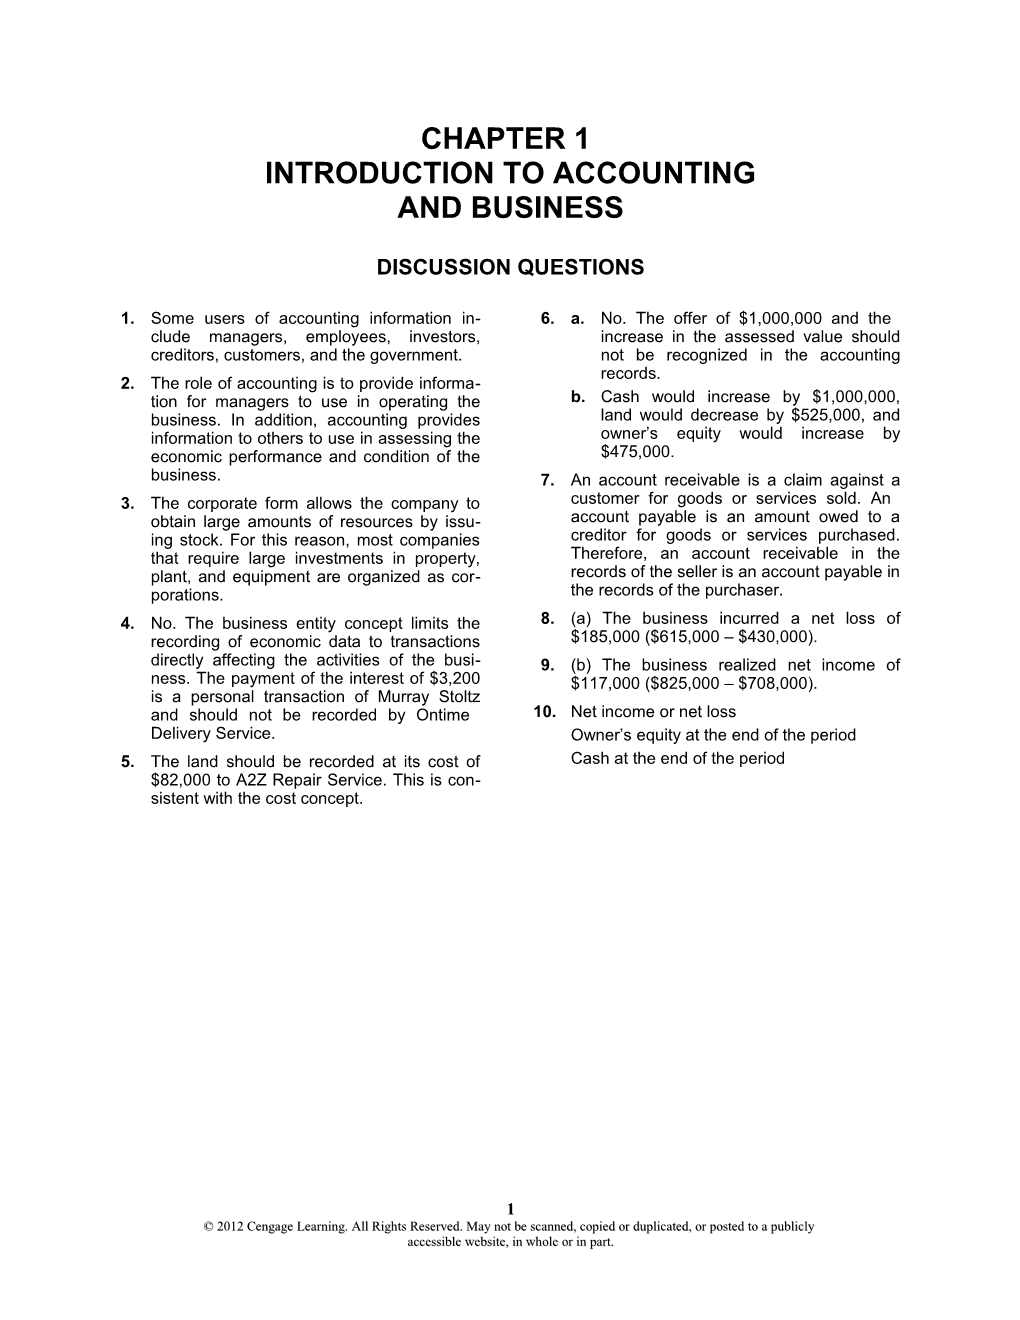 Chapter 1 Introduction to Accountingand Business